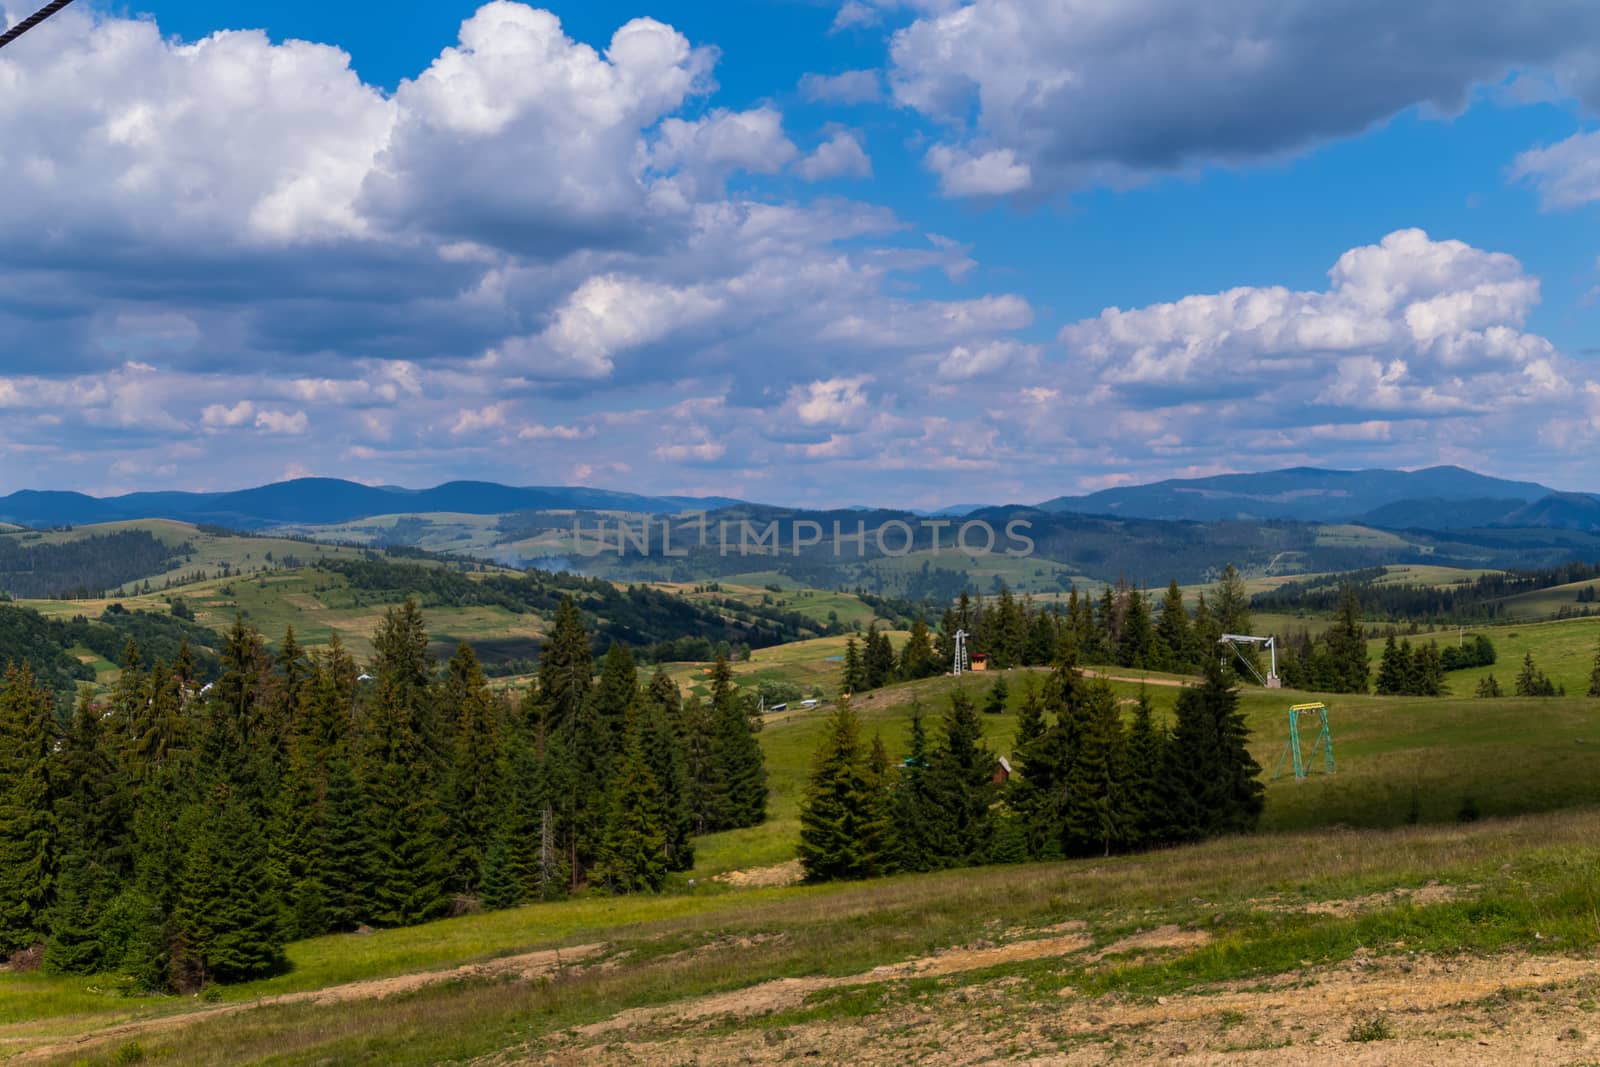 mountain landscape, green slopes, and, ski lifts against a cloudy blue sky